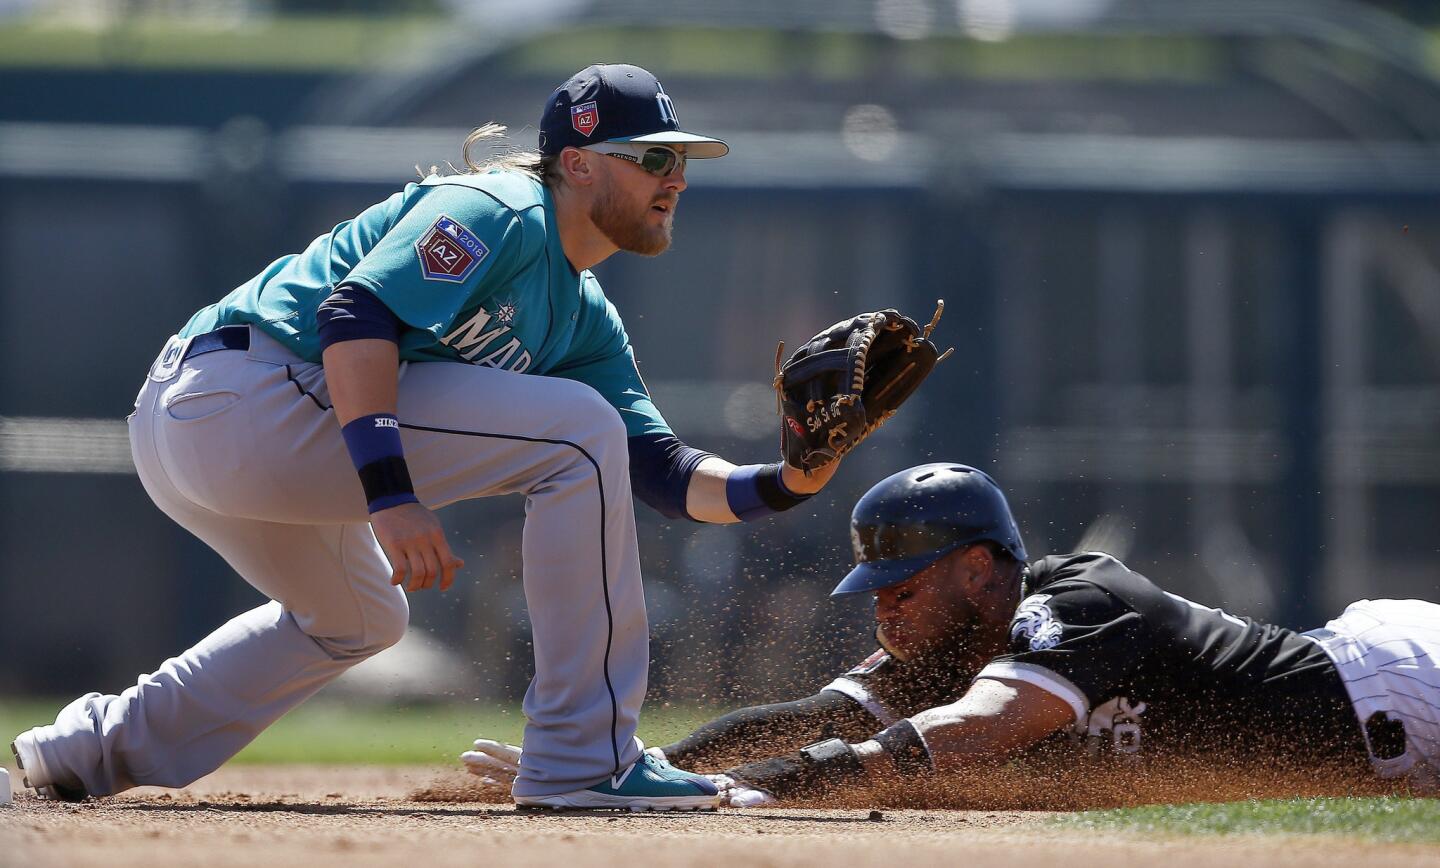 Yoan Moncada slides safely into second base with a steal as the Mariners' Taylor Motter waits for a late throw during the first inning of a spring game on March 23, 2018, in Glendale, Ariz.